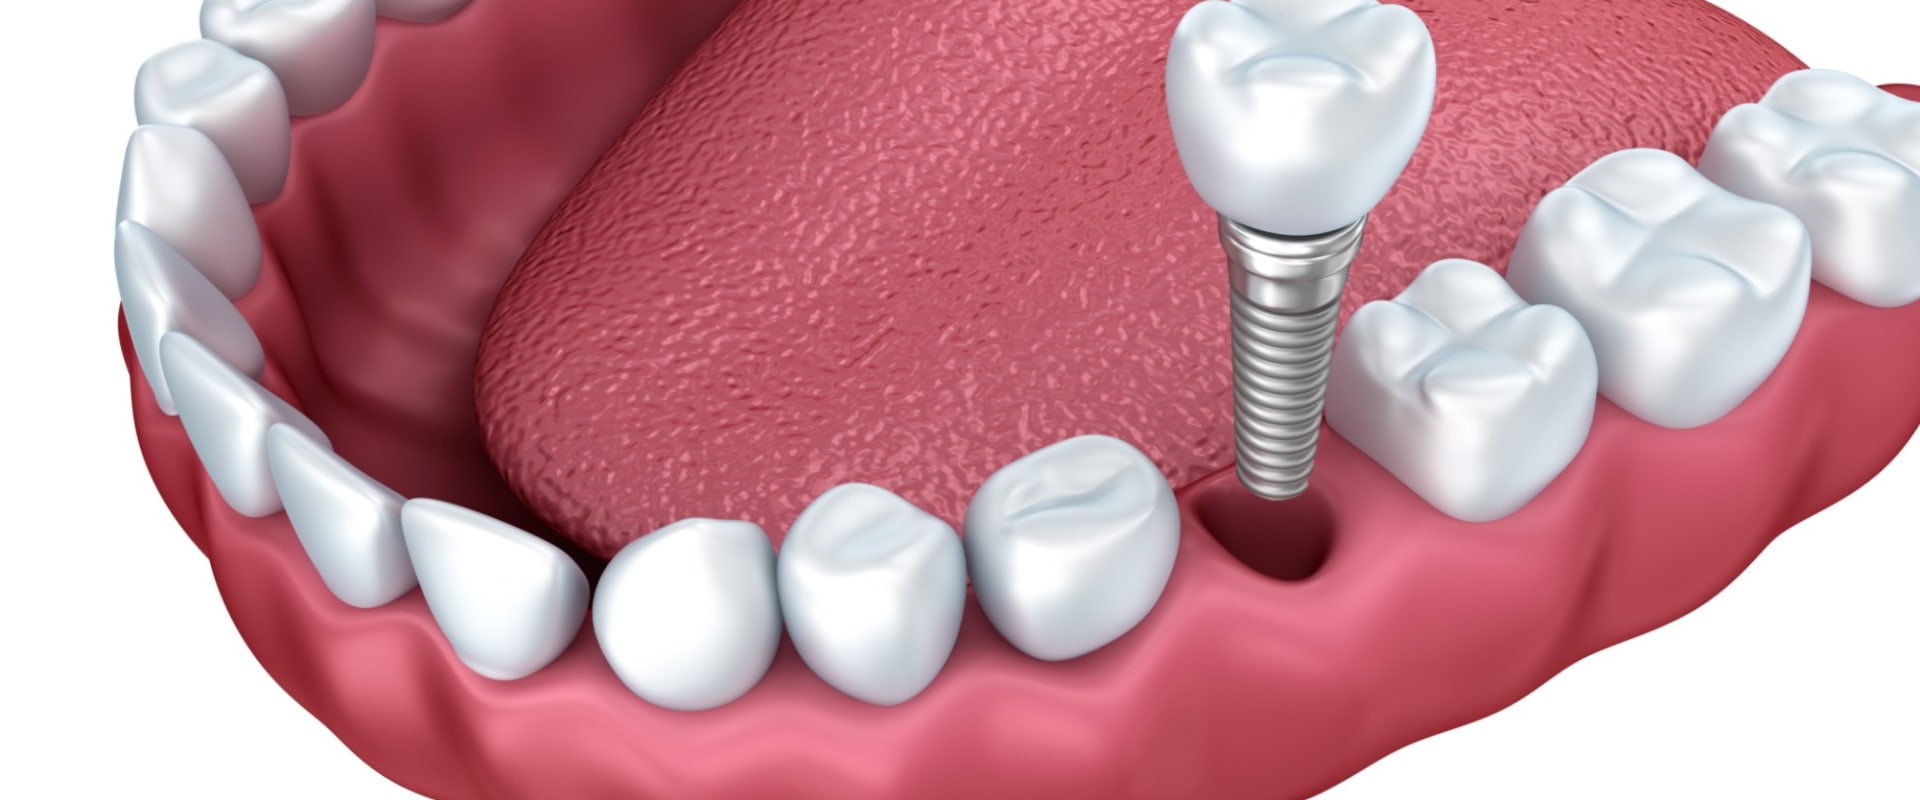 How do you know if your body is rejecting a dental implant?